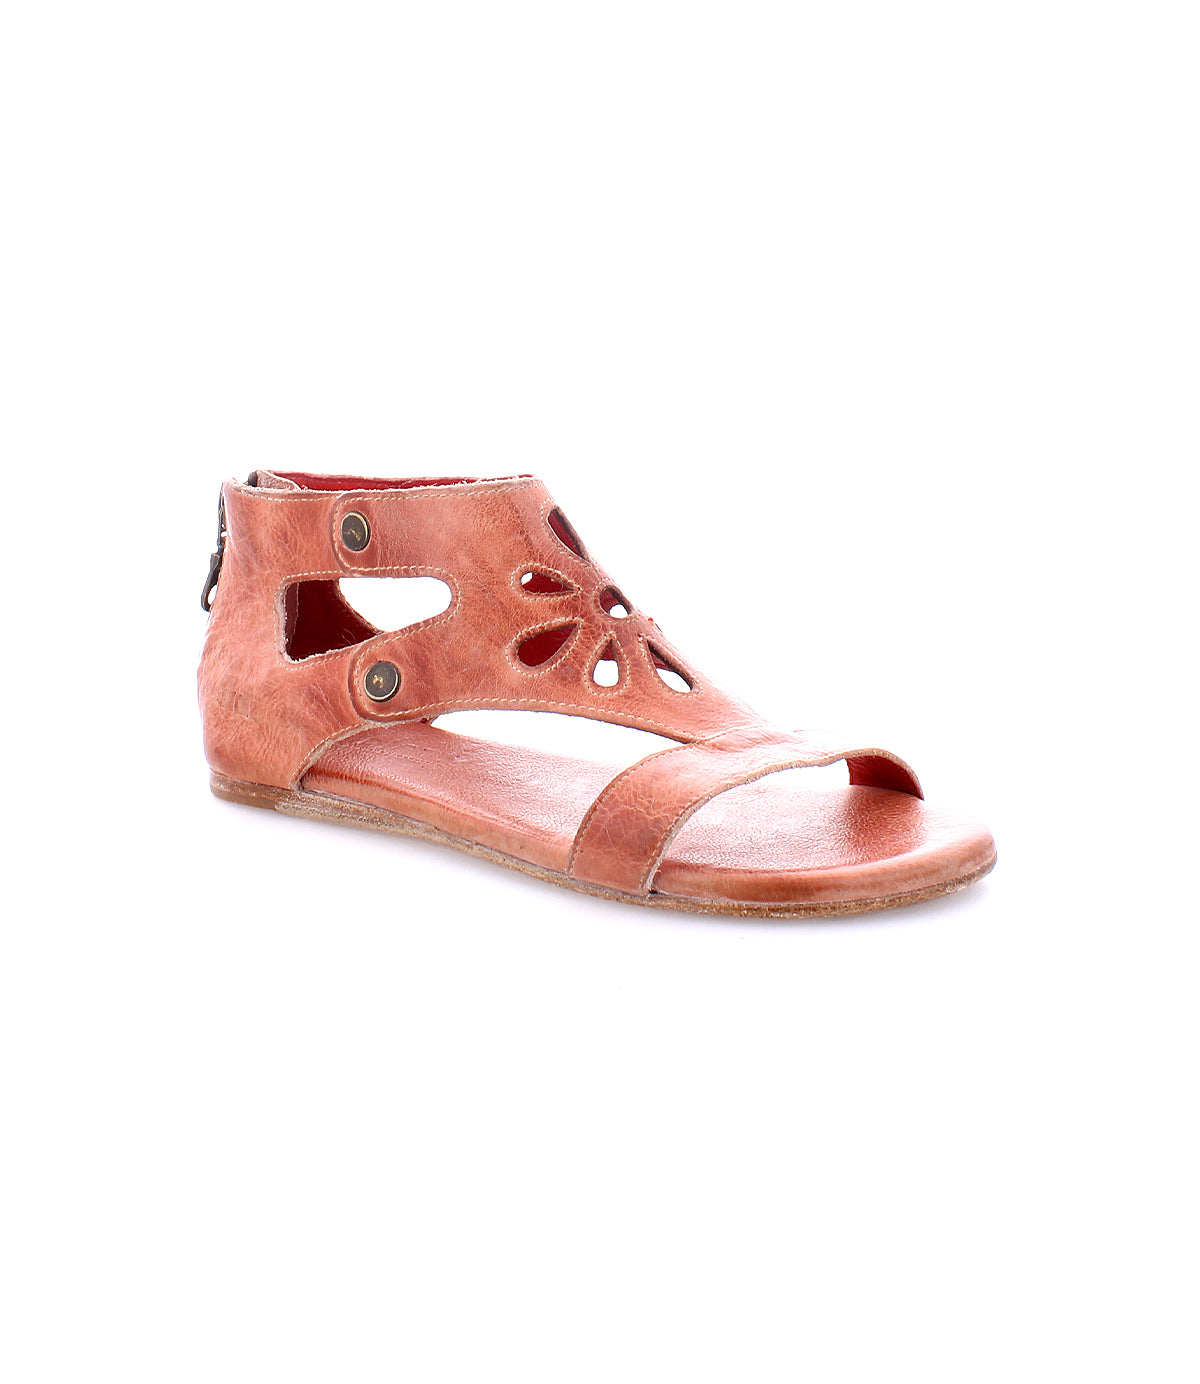 A single brown leather Bed Stu Soto Cutout sandal displayed against a white background.